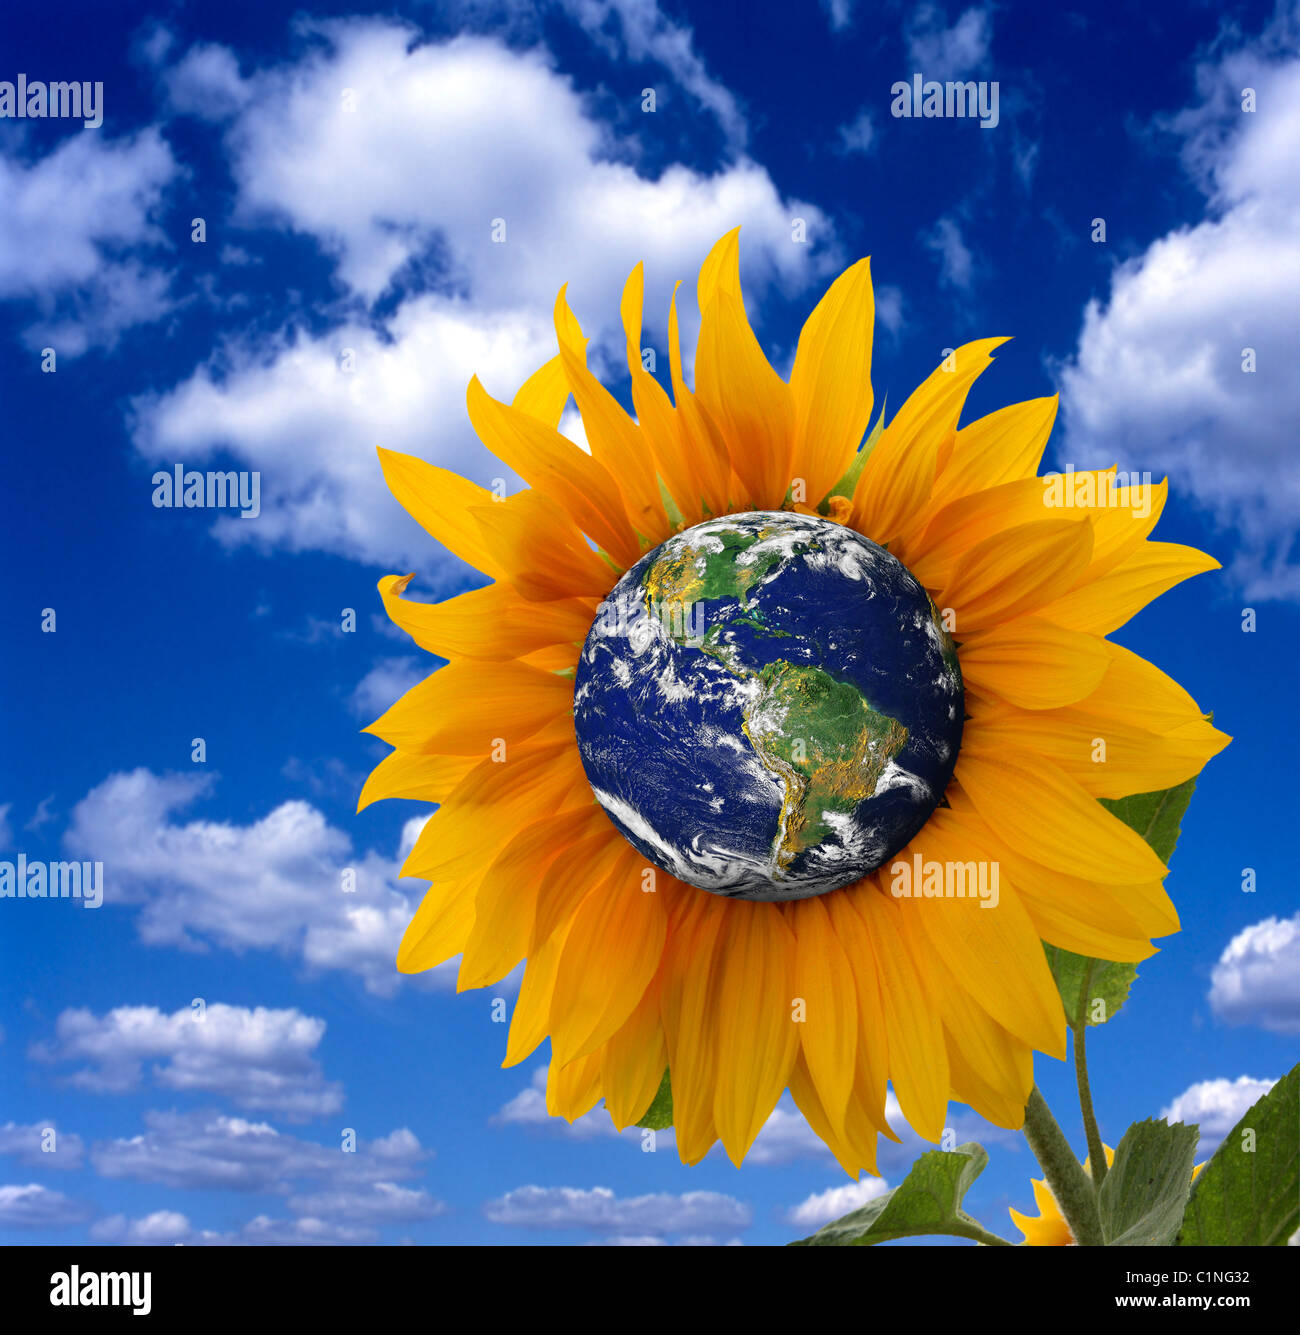 Earth as a sunflower, representing the planet as a living organism. Stock Photo